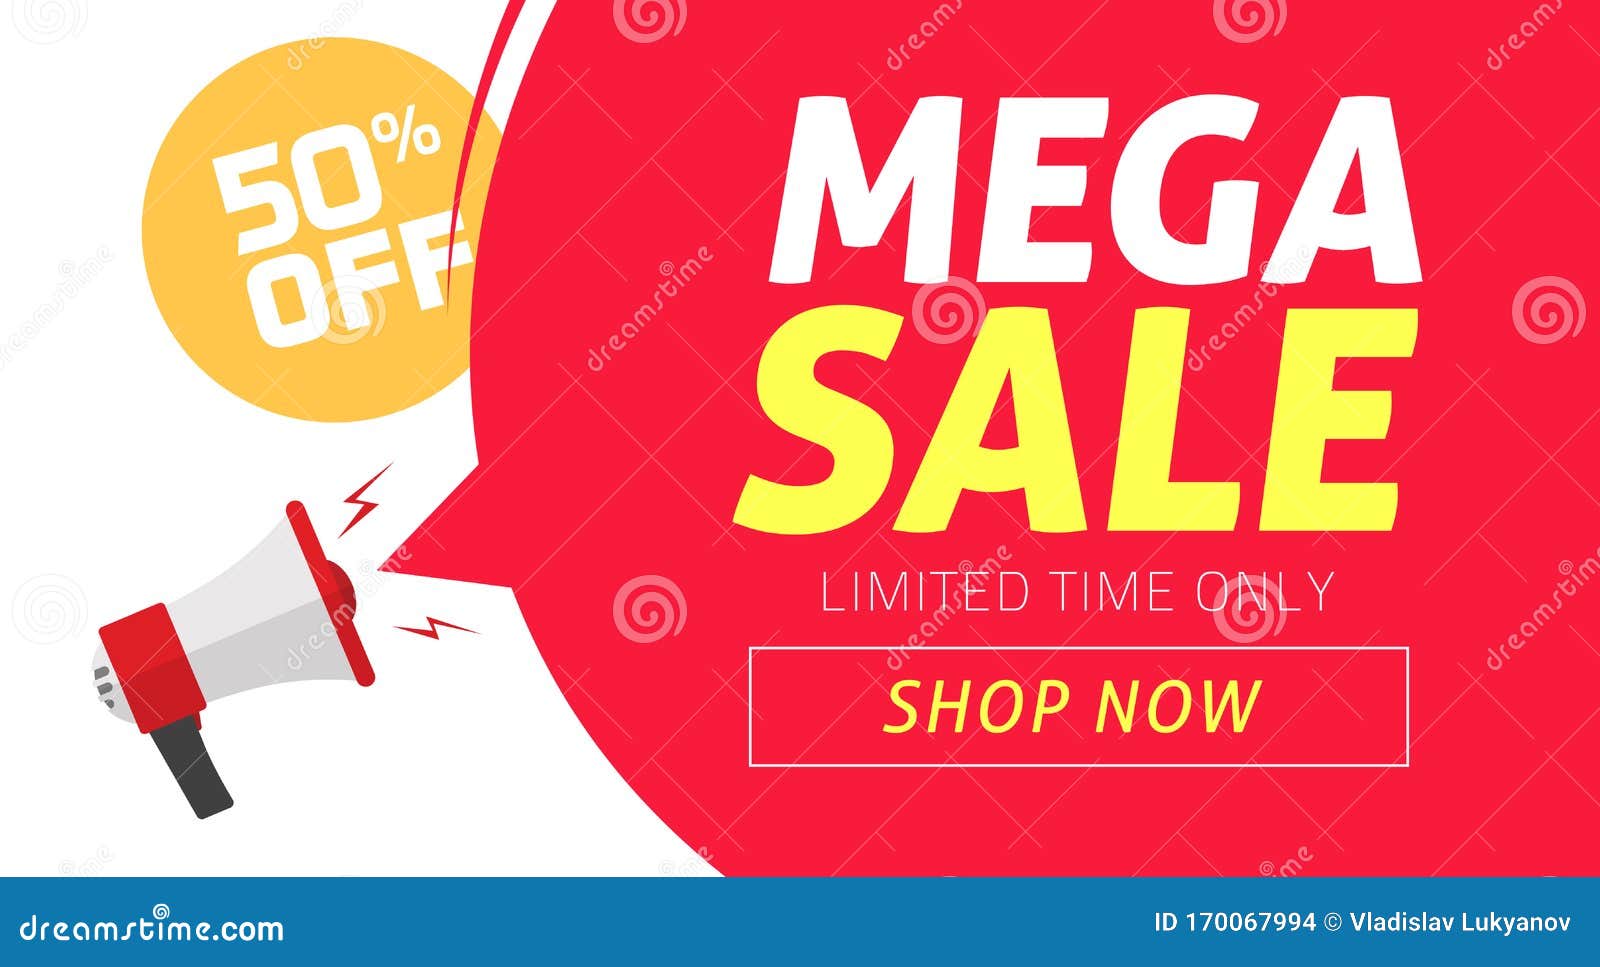 mega sale banner  with off price discount offer tag and megaphone announce  , flat clearance